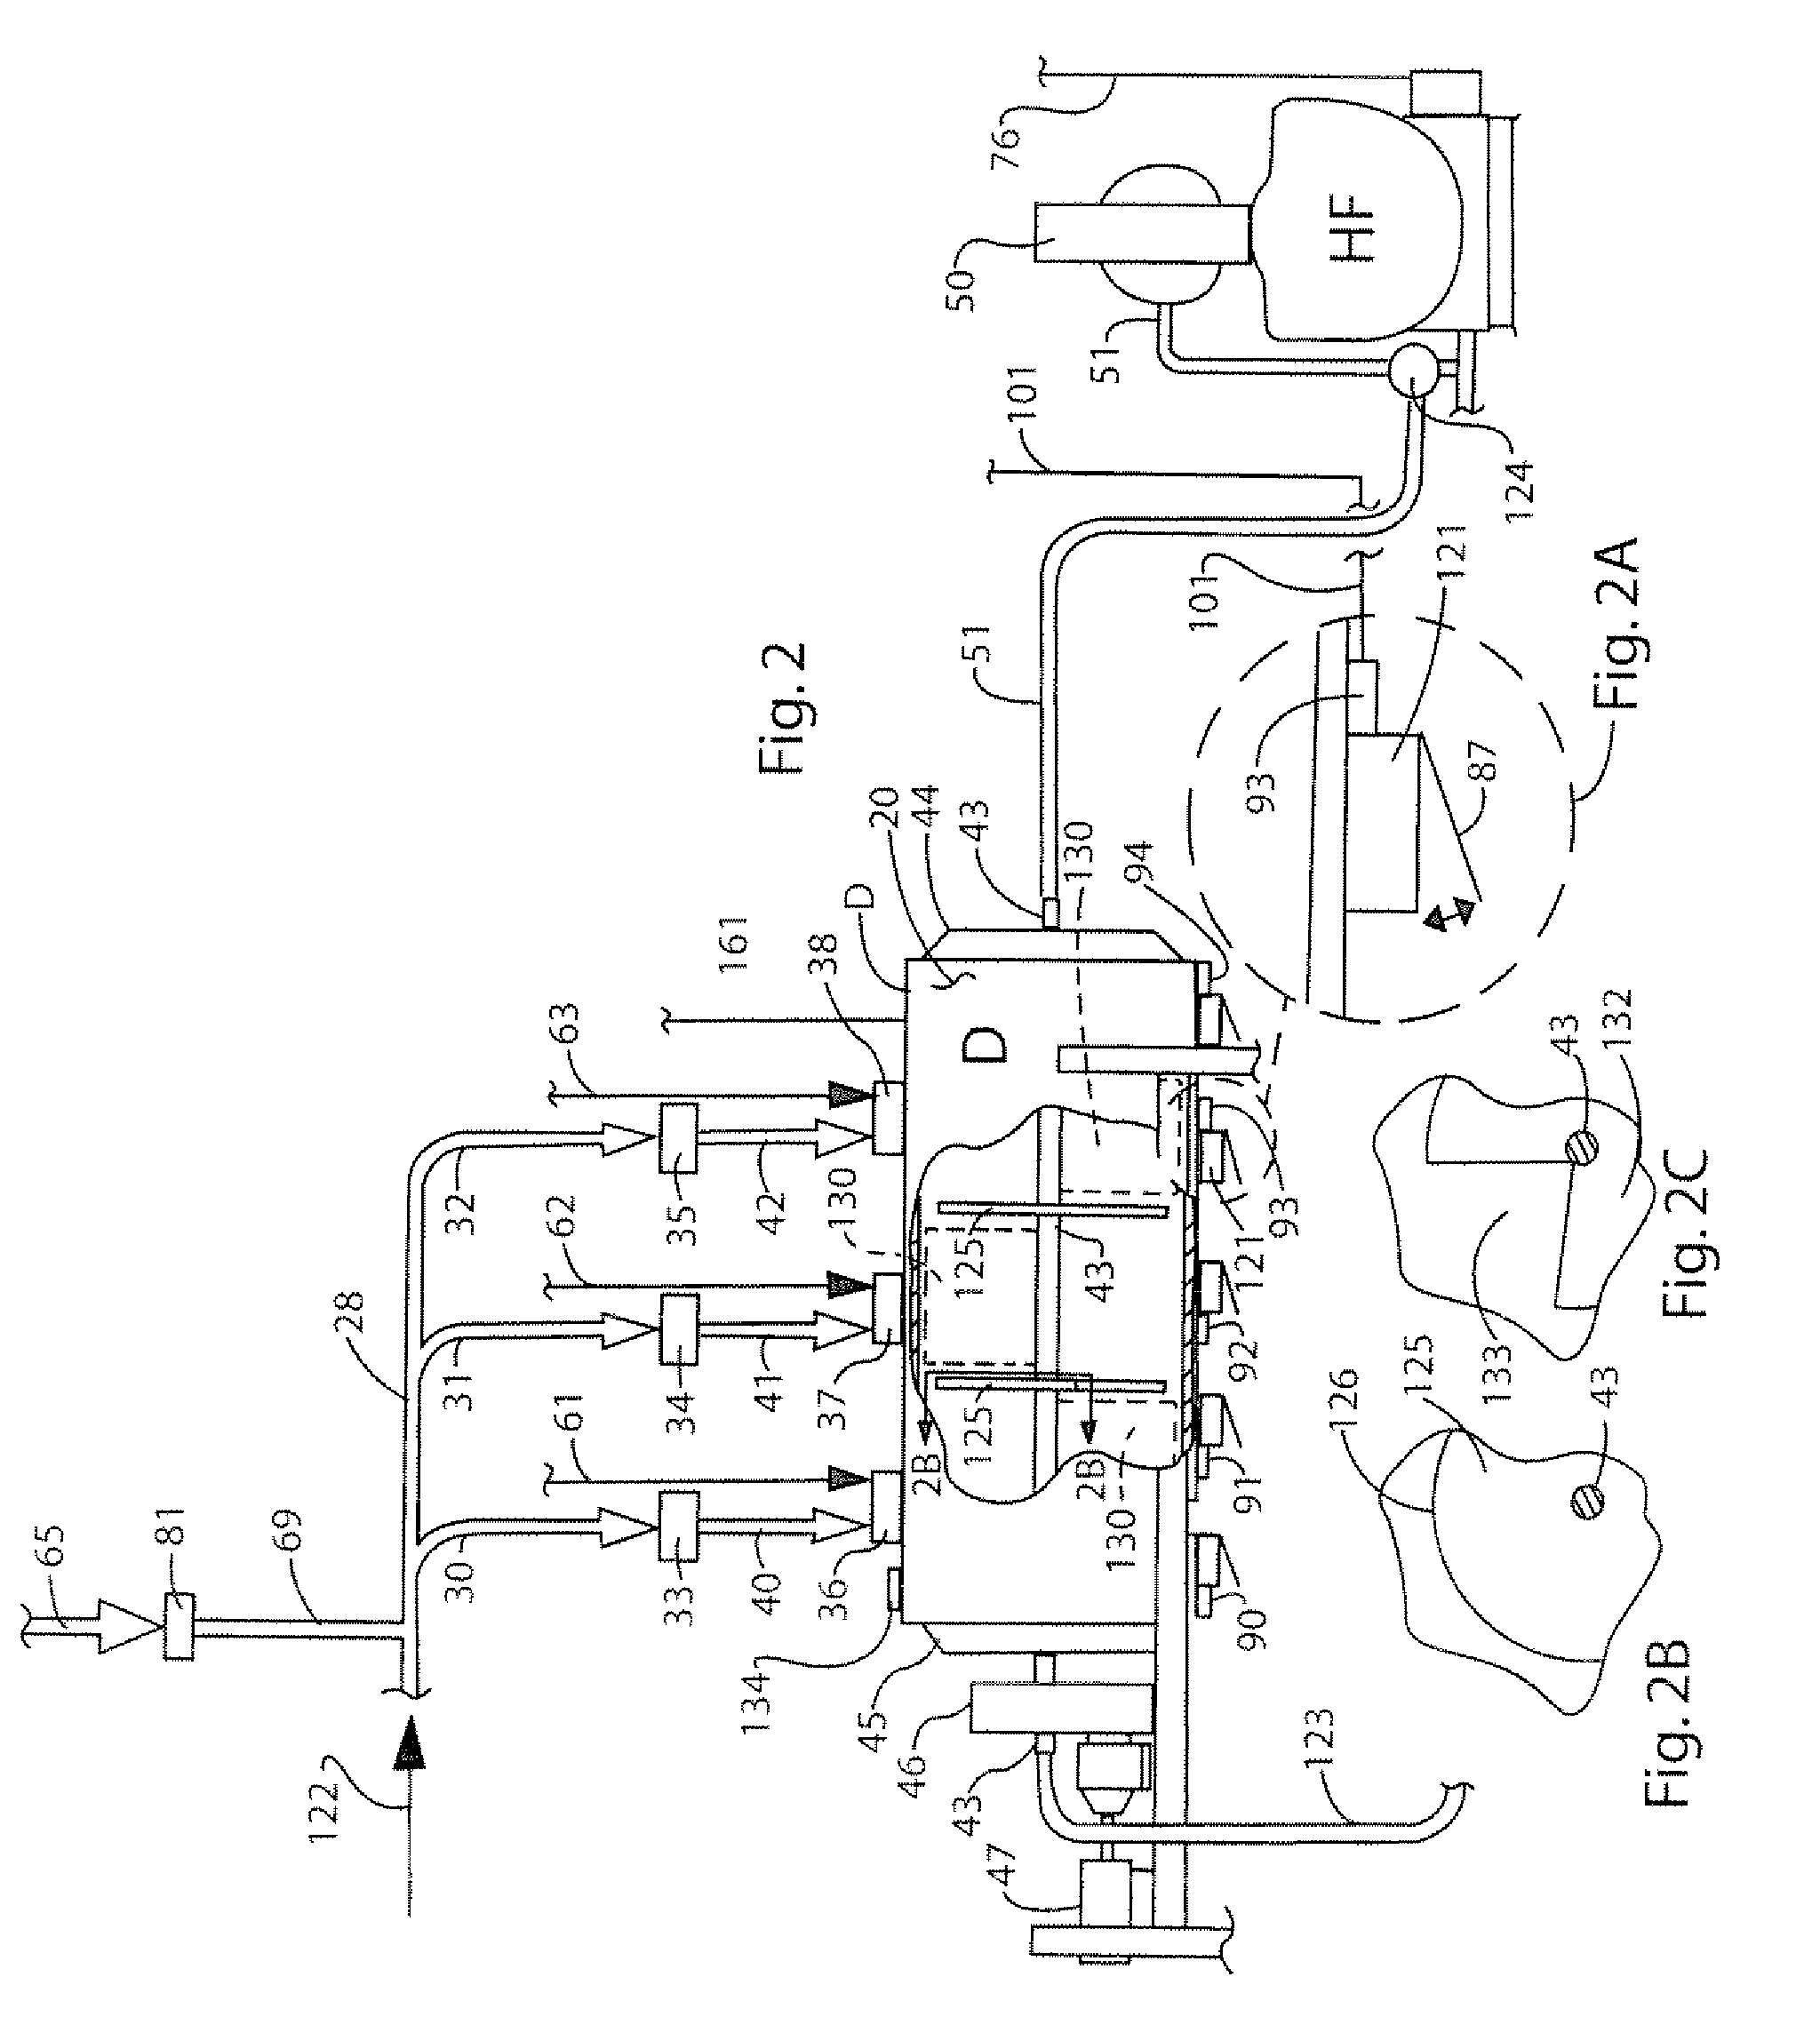 Apparatus, method and system for treating sewage sludge